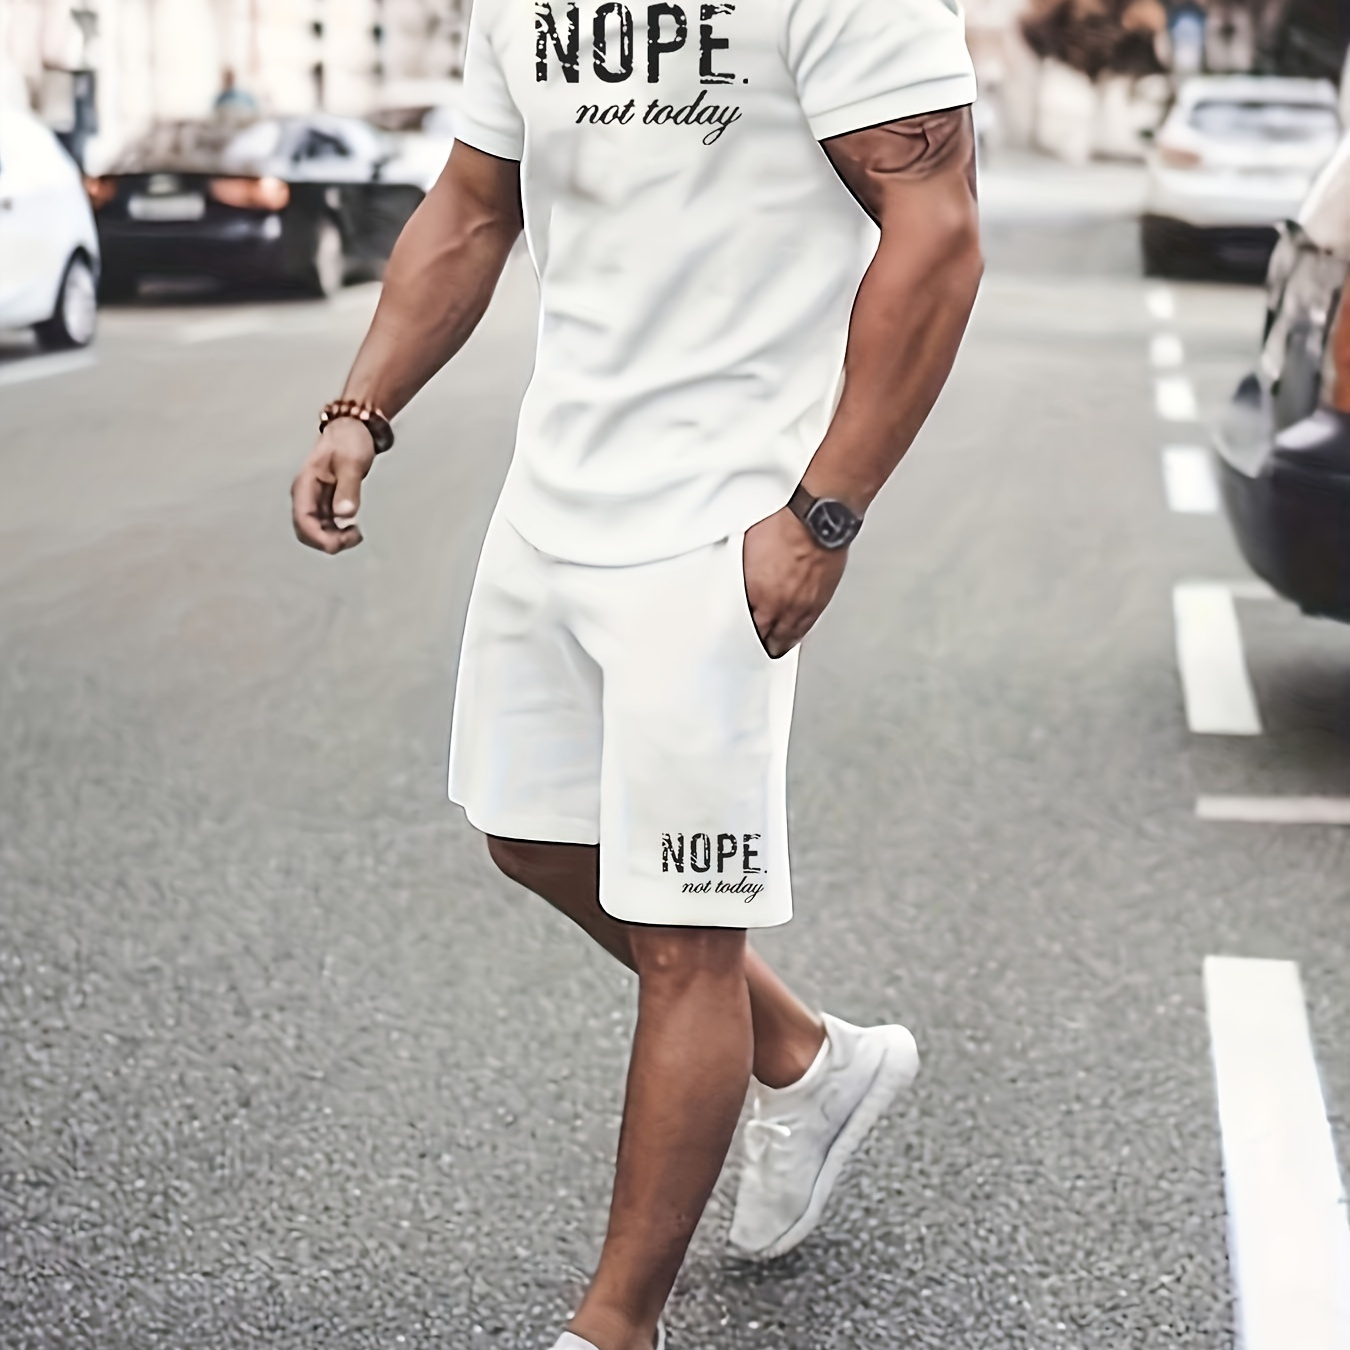 

Men's Plus Size "nope" Letters Print Short-sleeve T-shirt Shorts Set, Summer Trend Graphic 2pcs Outfits For Sports, Workout, Men Clothing